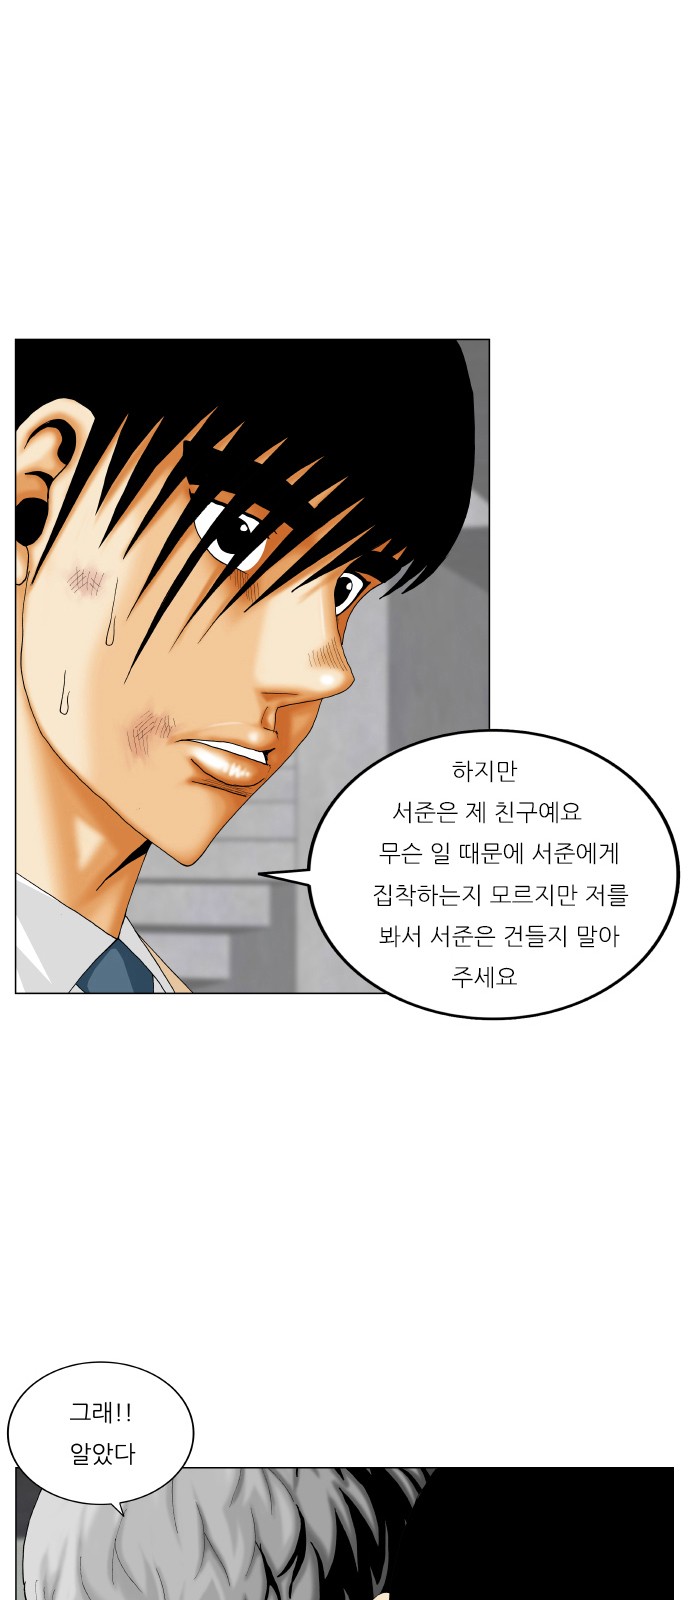 Ultimate Legend - Kang Hae Hyo - Chapter 349 - Page 2